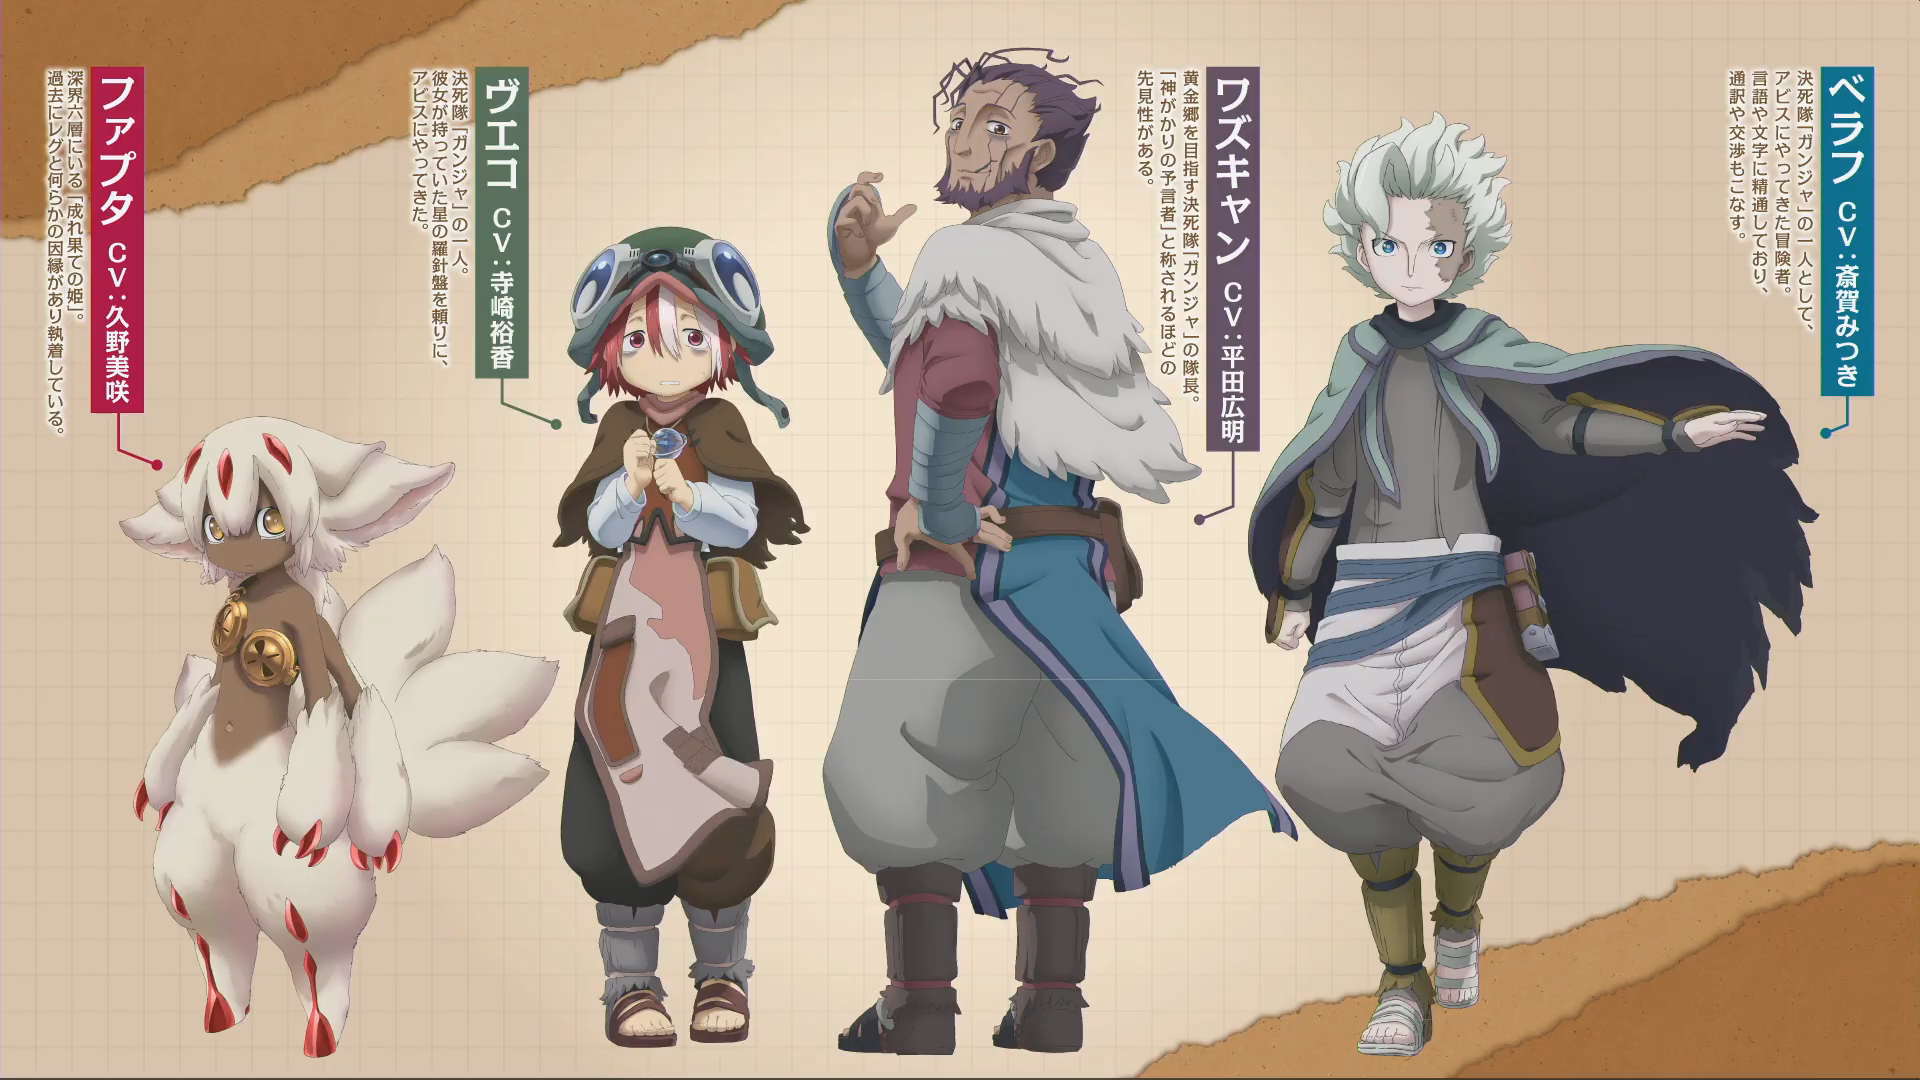 Made in Abyss Season 2 Reveals Second Trailer, Theme Songs